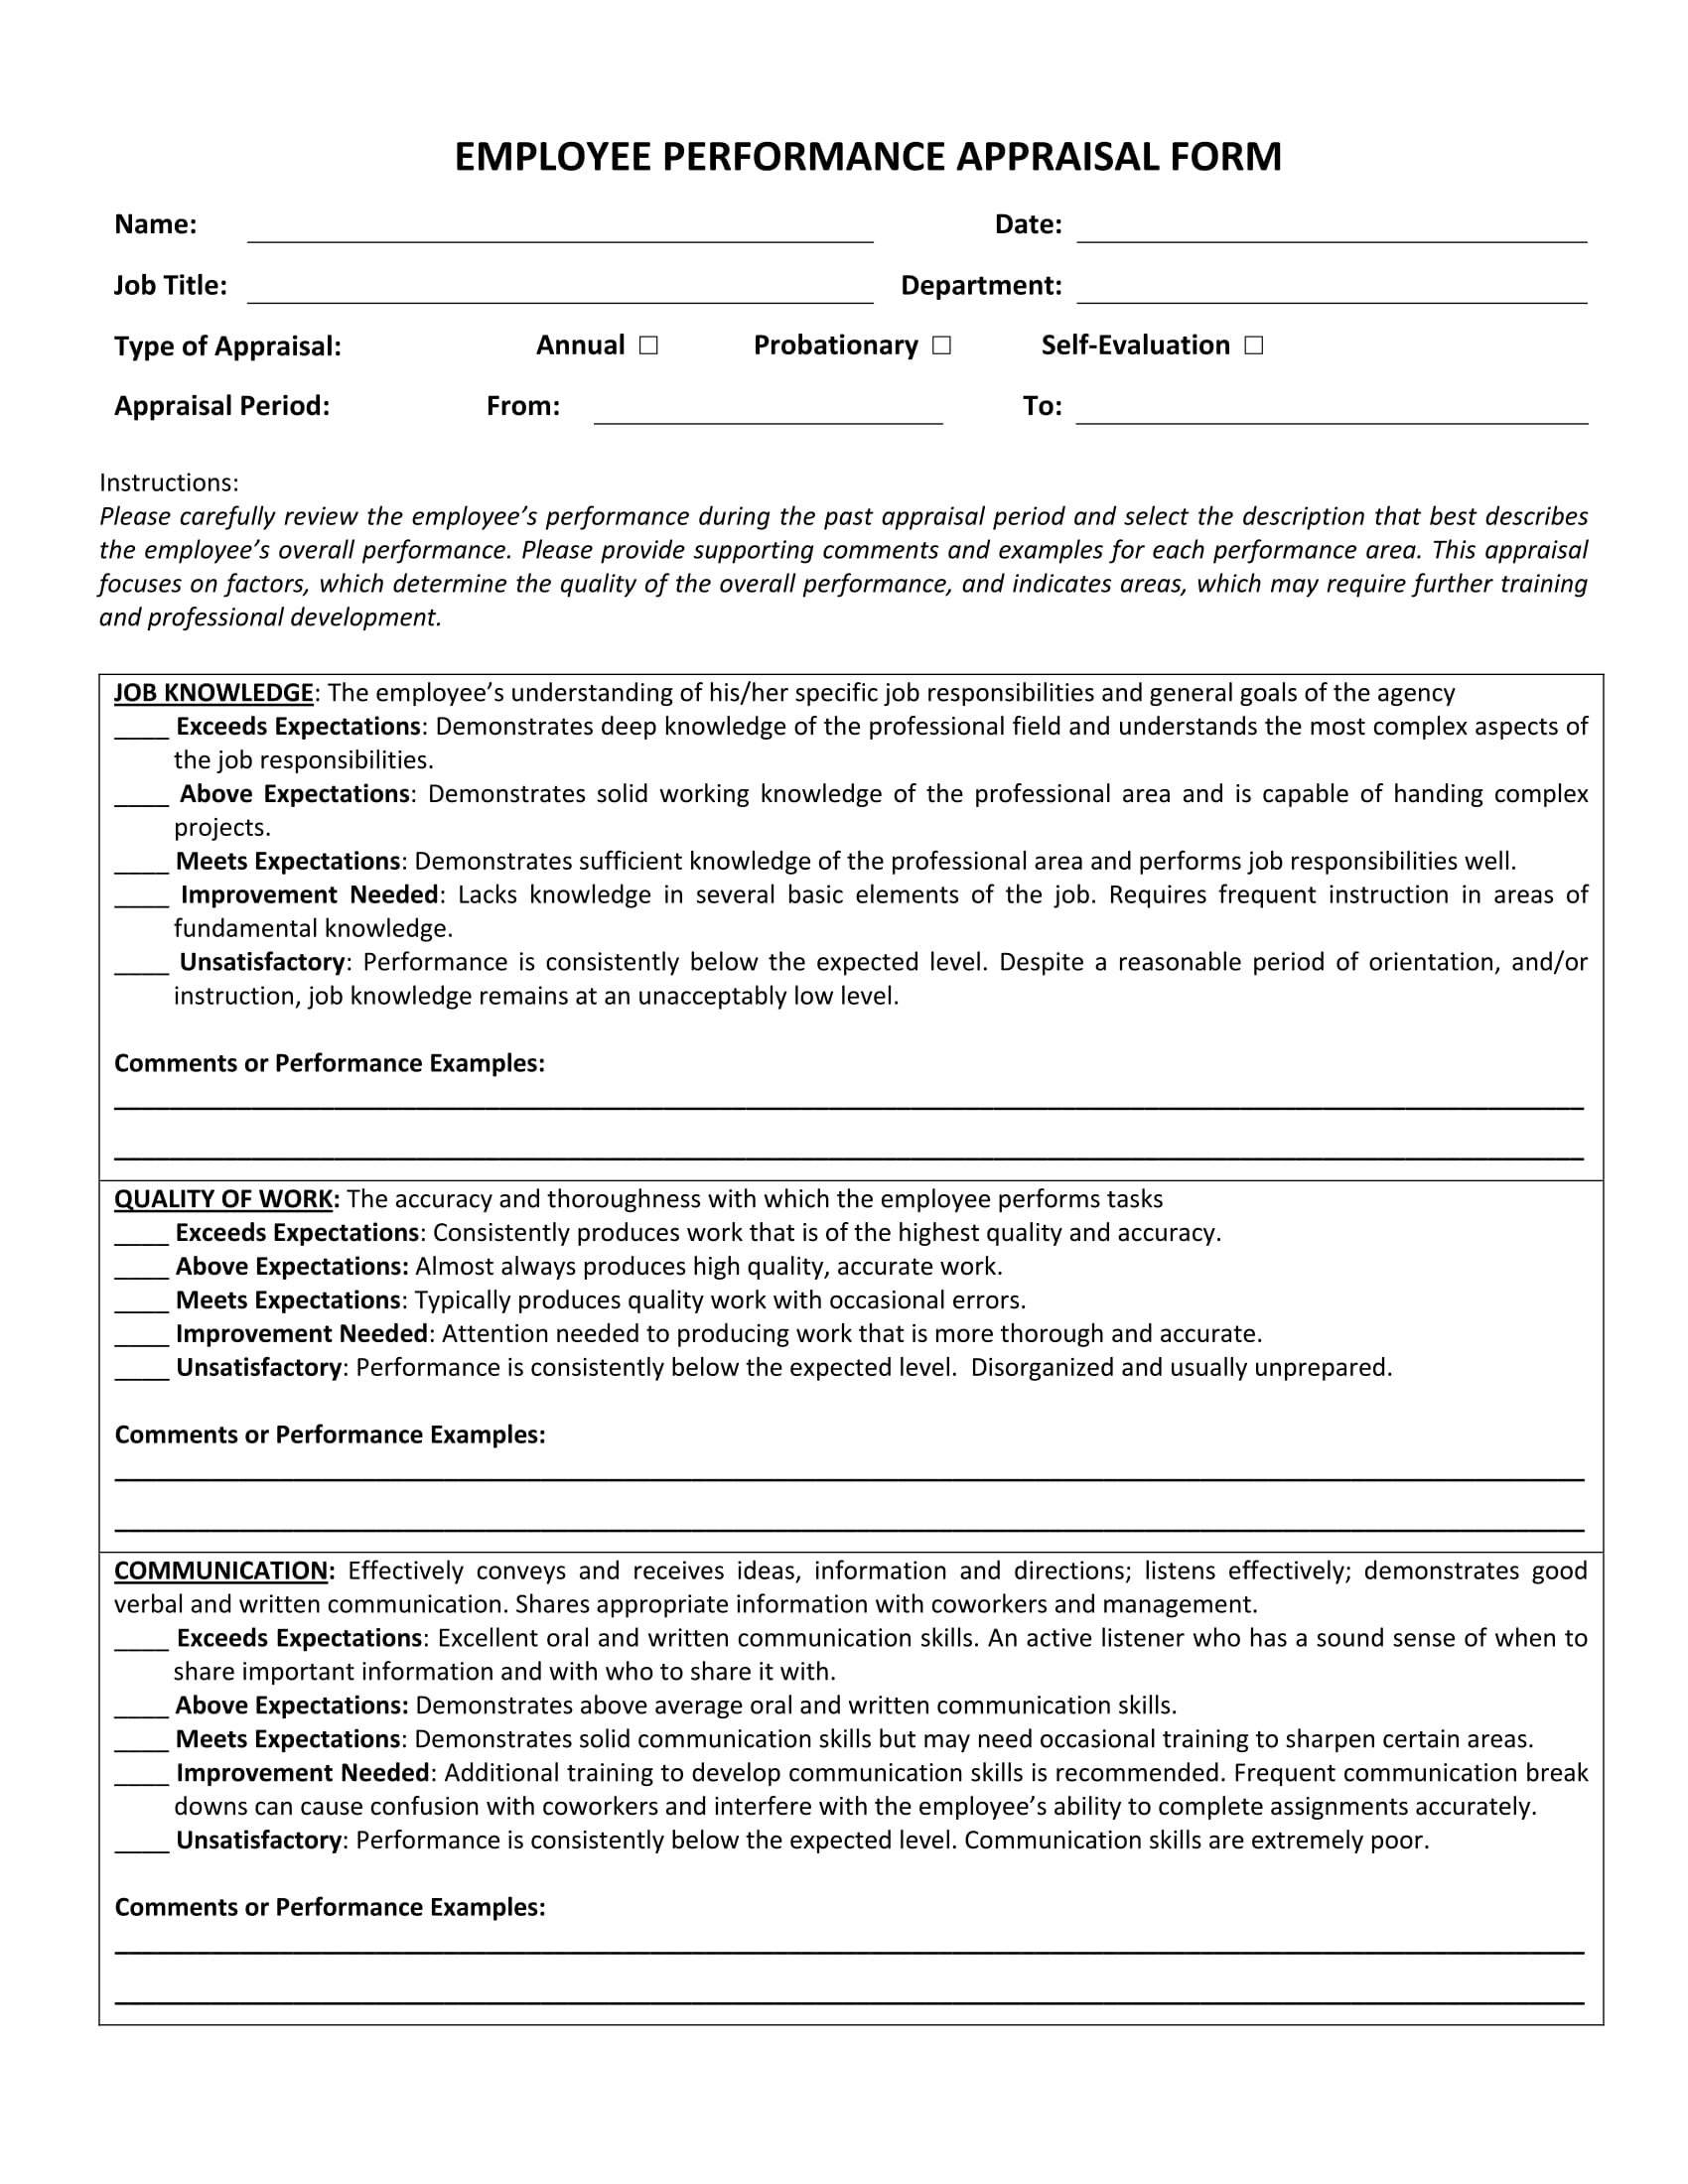 printable-free-14-employee-appraisal-forms-in-pdf-excel-ms-employee